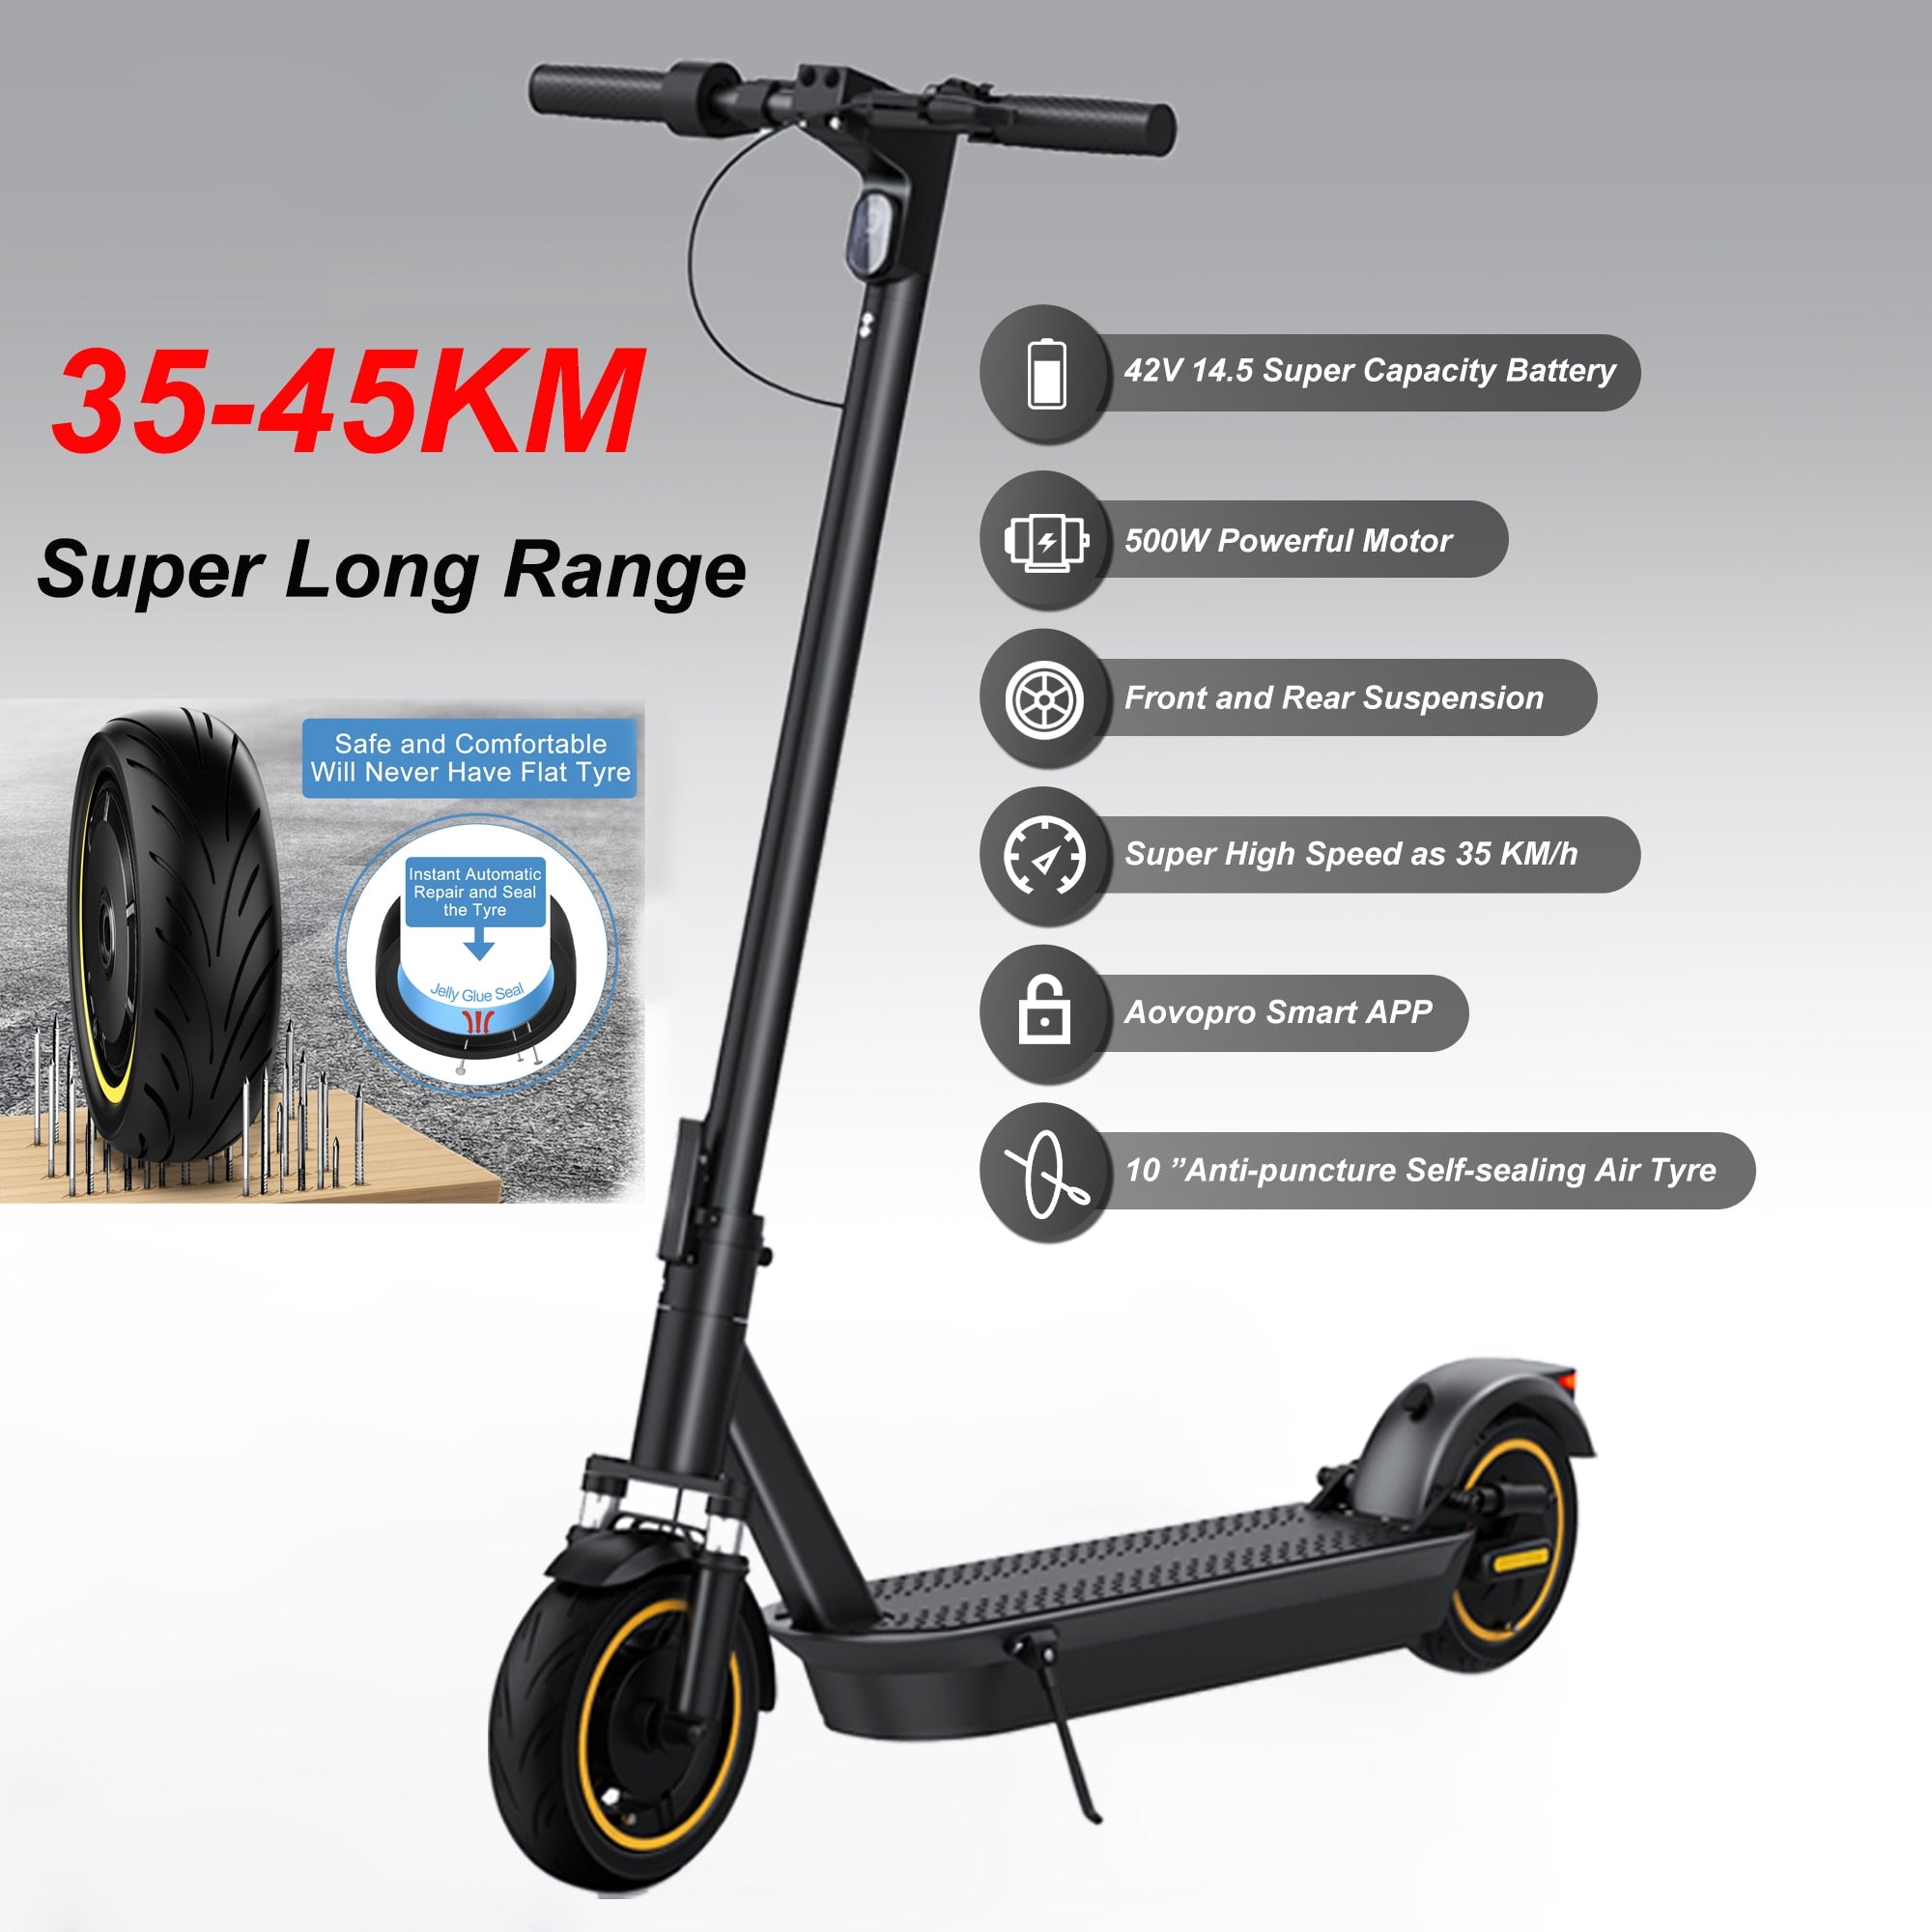 AOVOPRO New ESMAX Electric Scooter 500W 40km/h Adult APP Smart Scooter Shock-absorbing Anti-skid Folding Electric Scooter